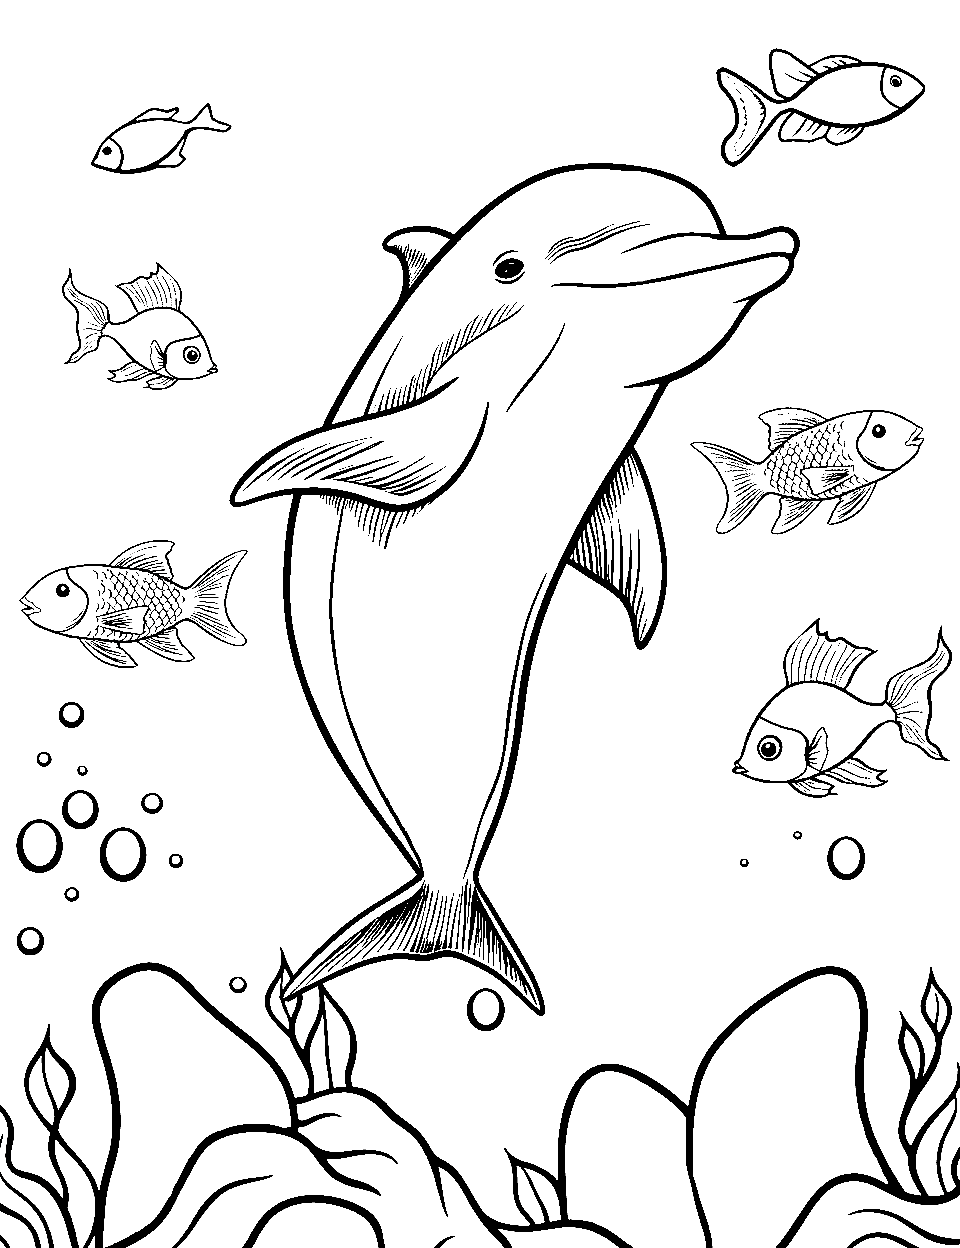 35 Dolphin Coloring Pages: Free Printable Sheets